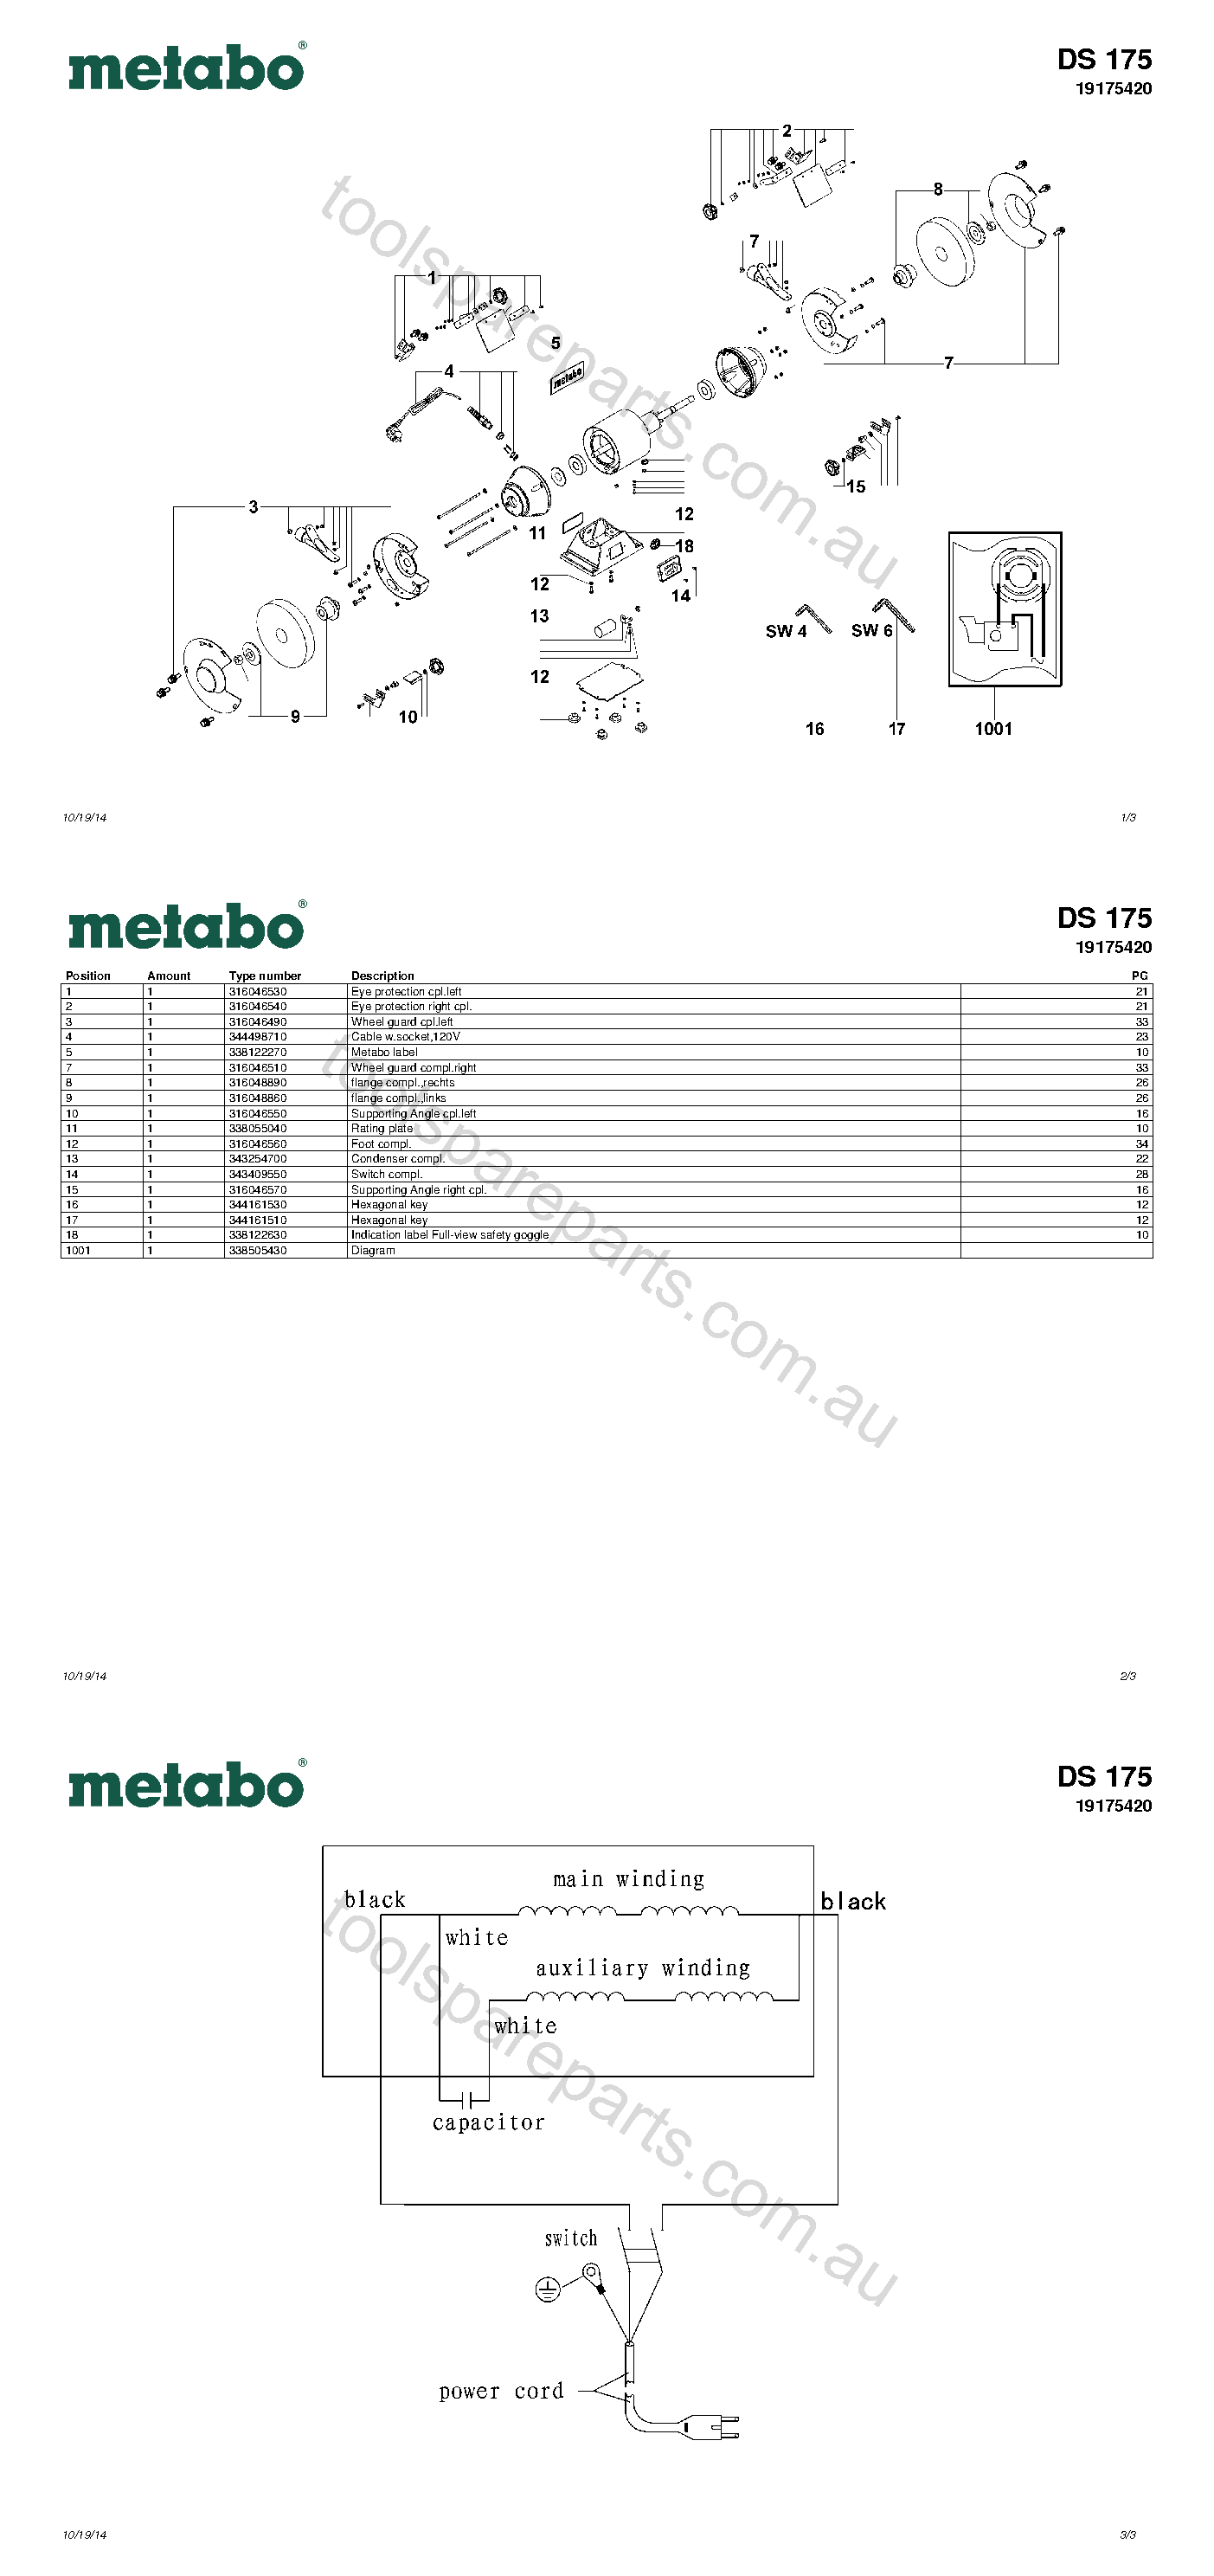 Metabo DS 175 19175420  Diagram 1